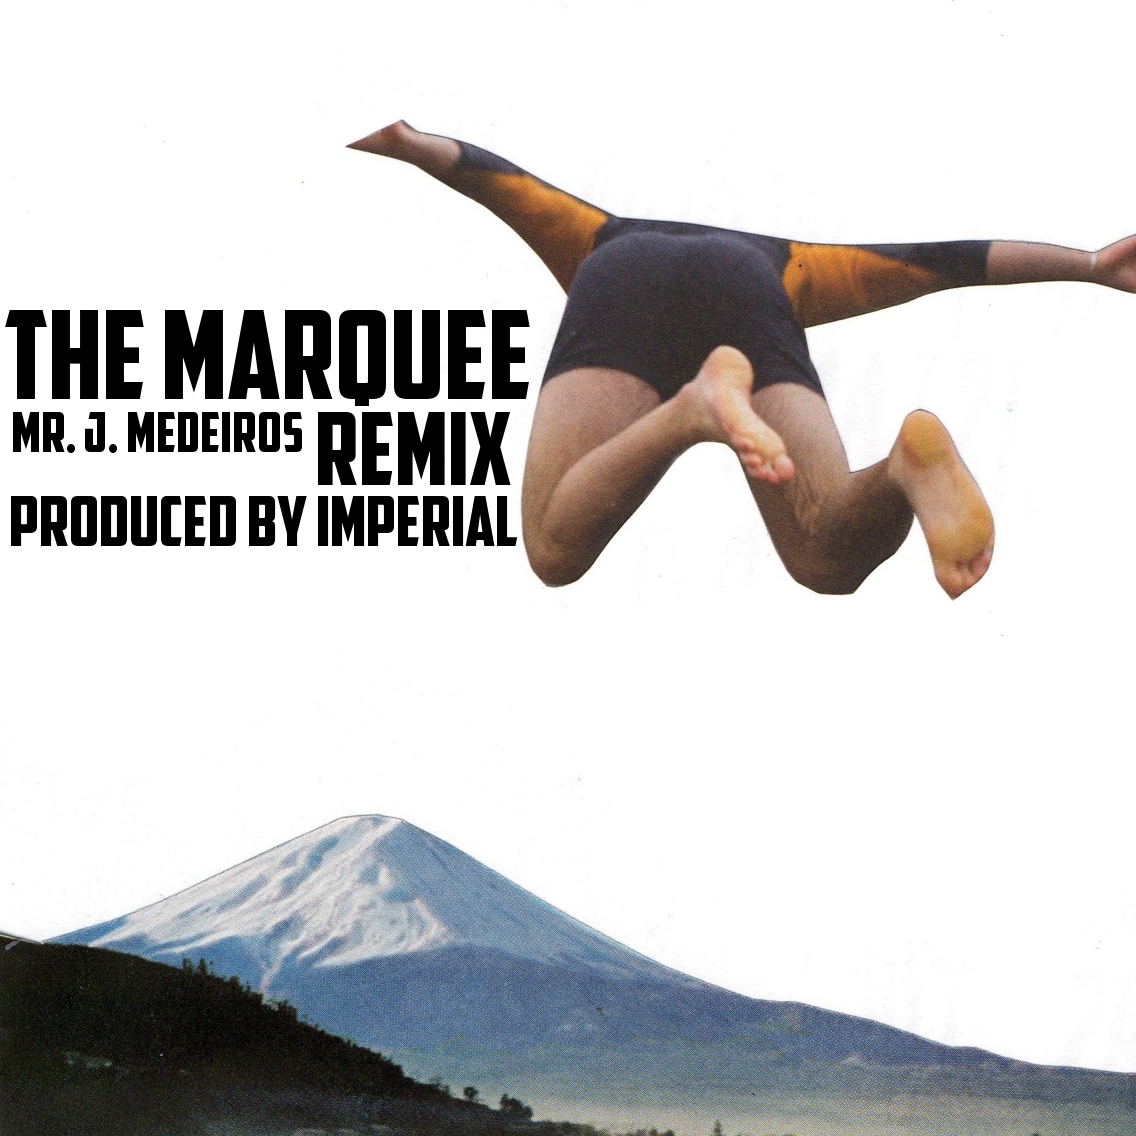 Free MP3: Mr. J Medeiros – The Marquee (Imperial Remix)